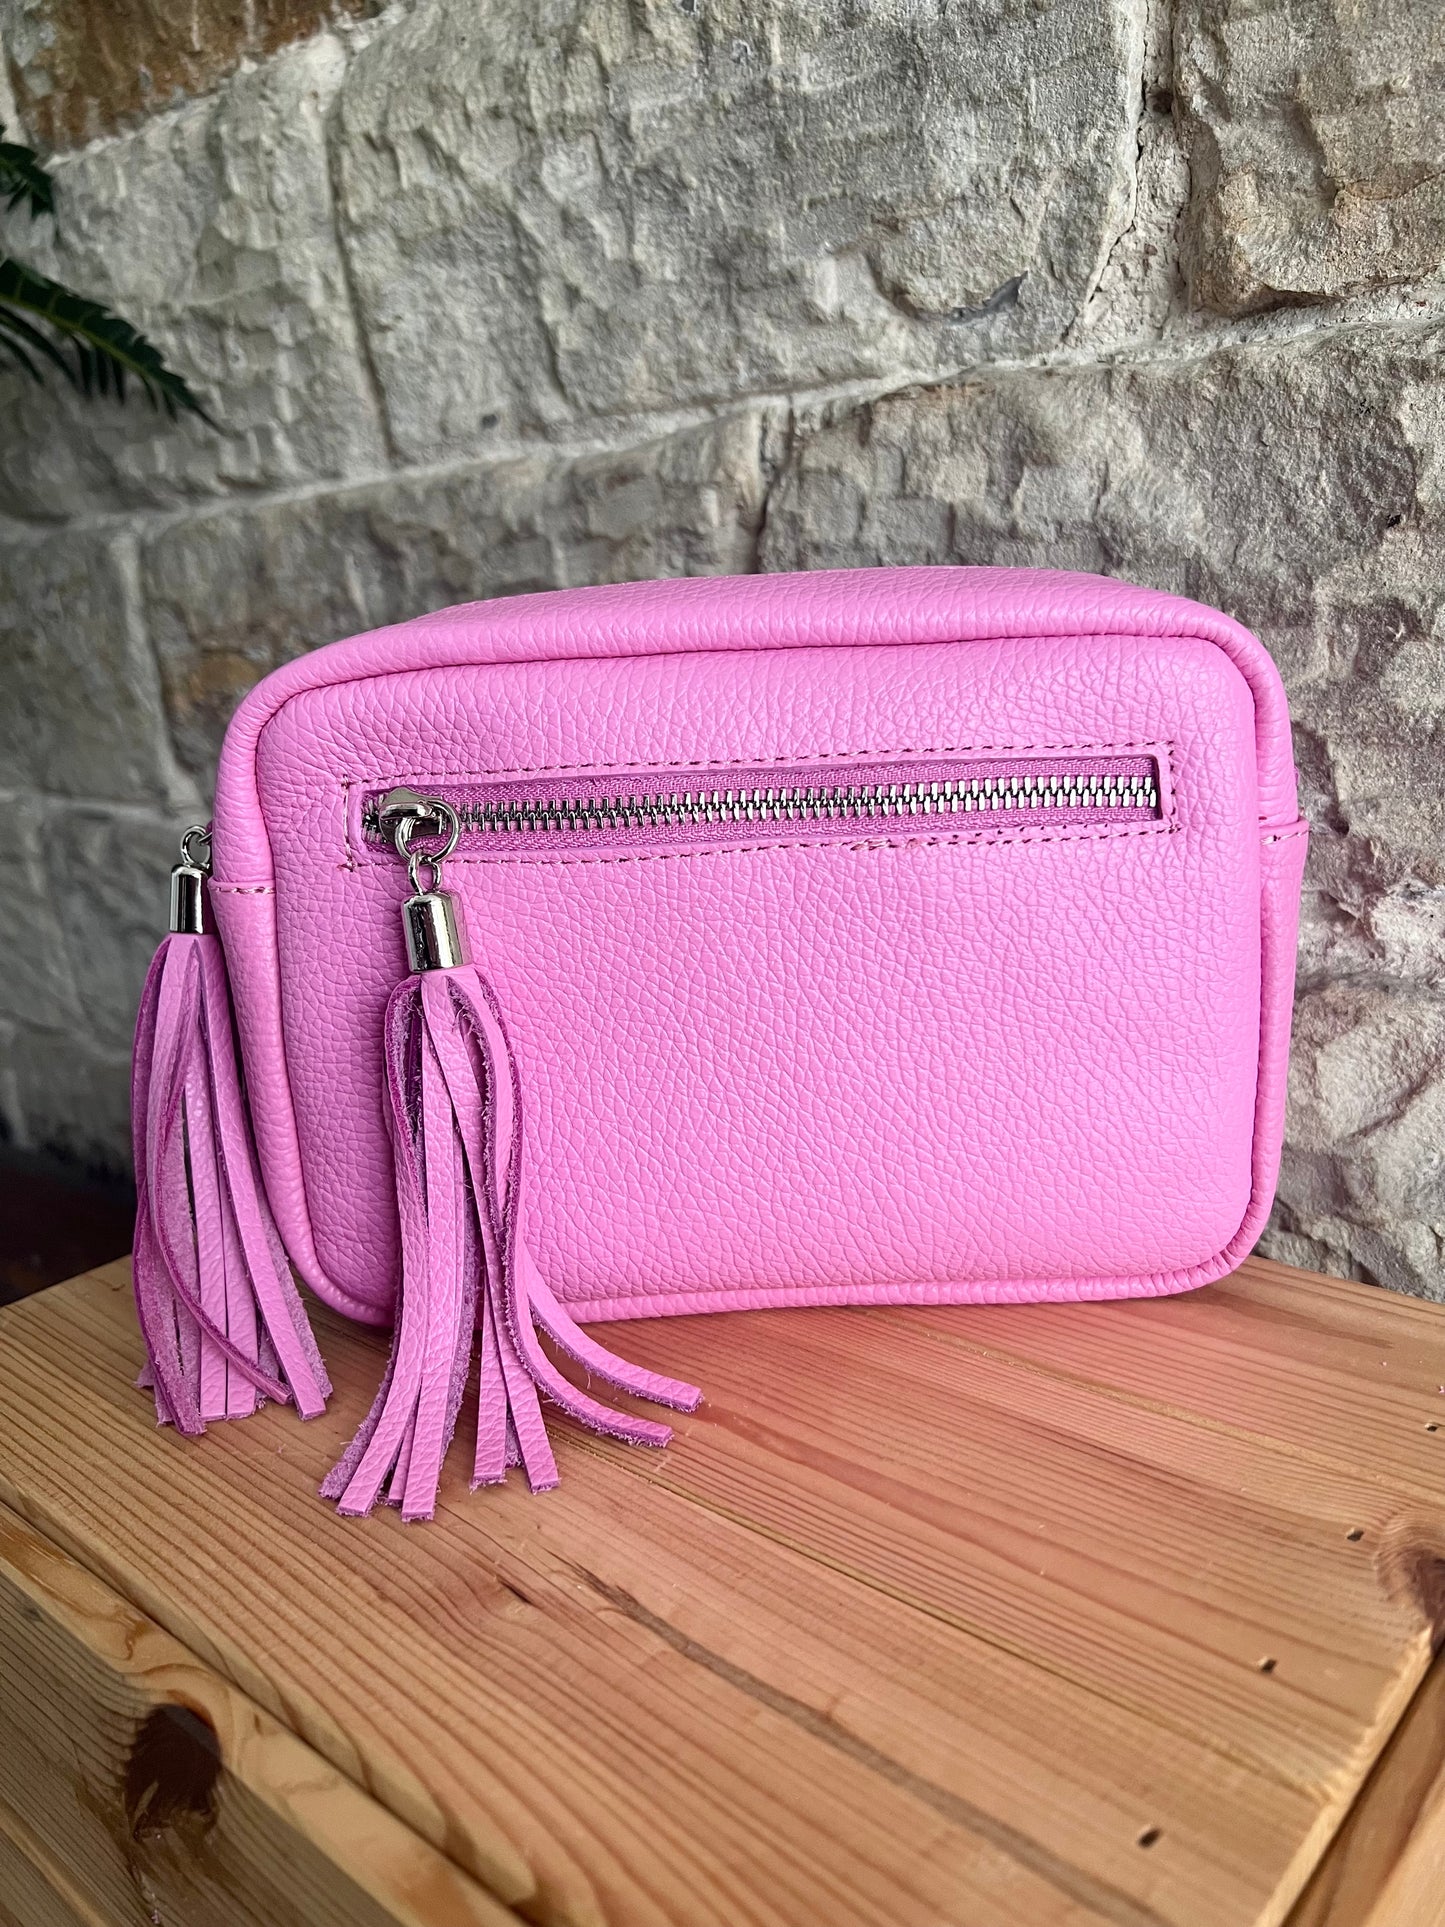 NIKKI - Leather Cross Body 'Camera' Bag with Tassels - Candy Pink